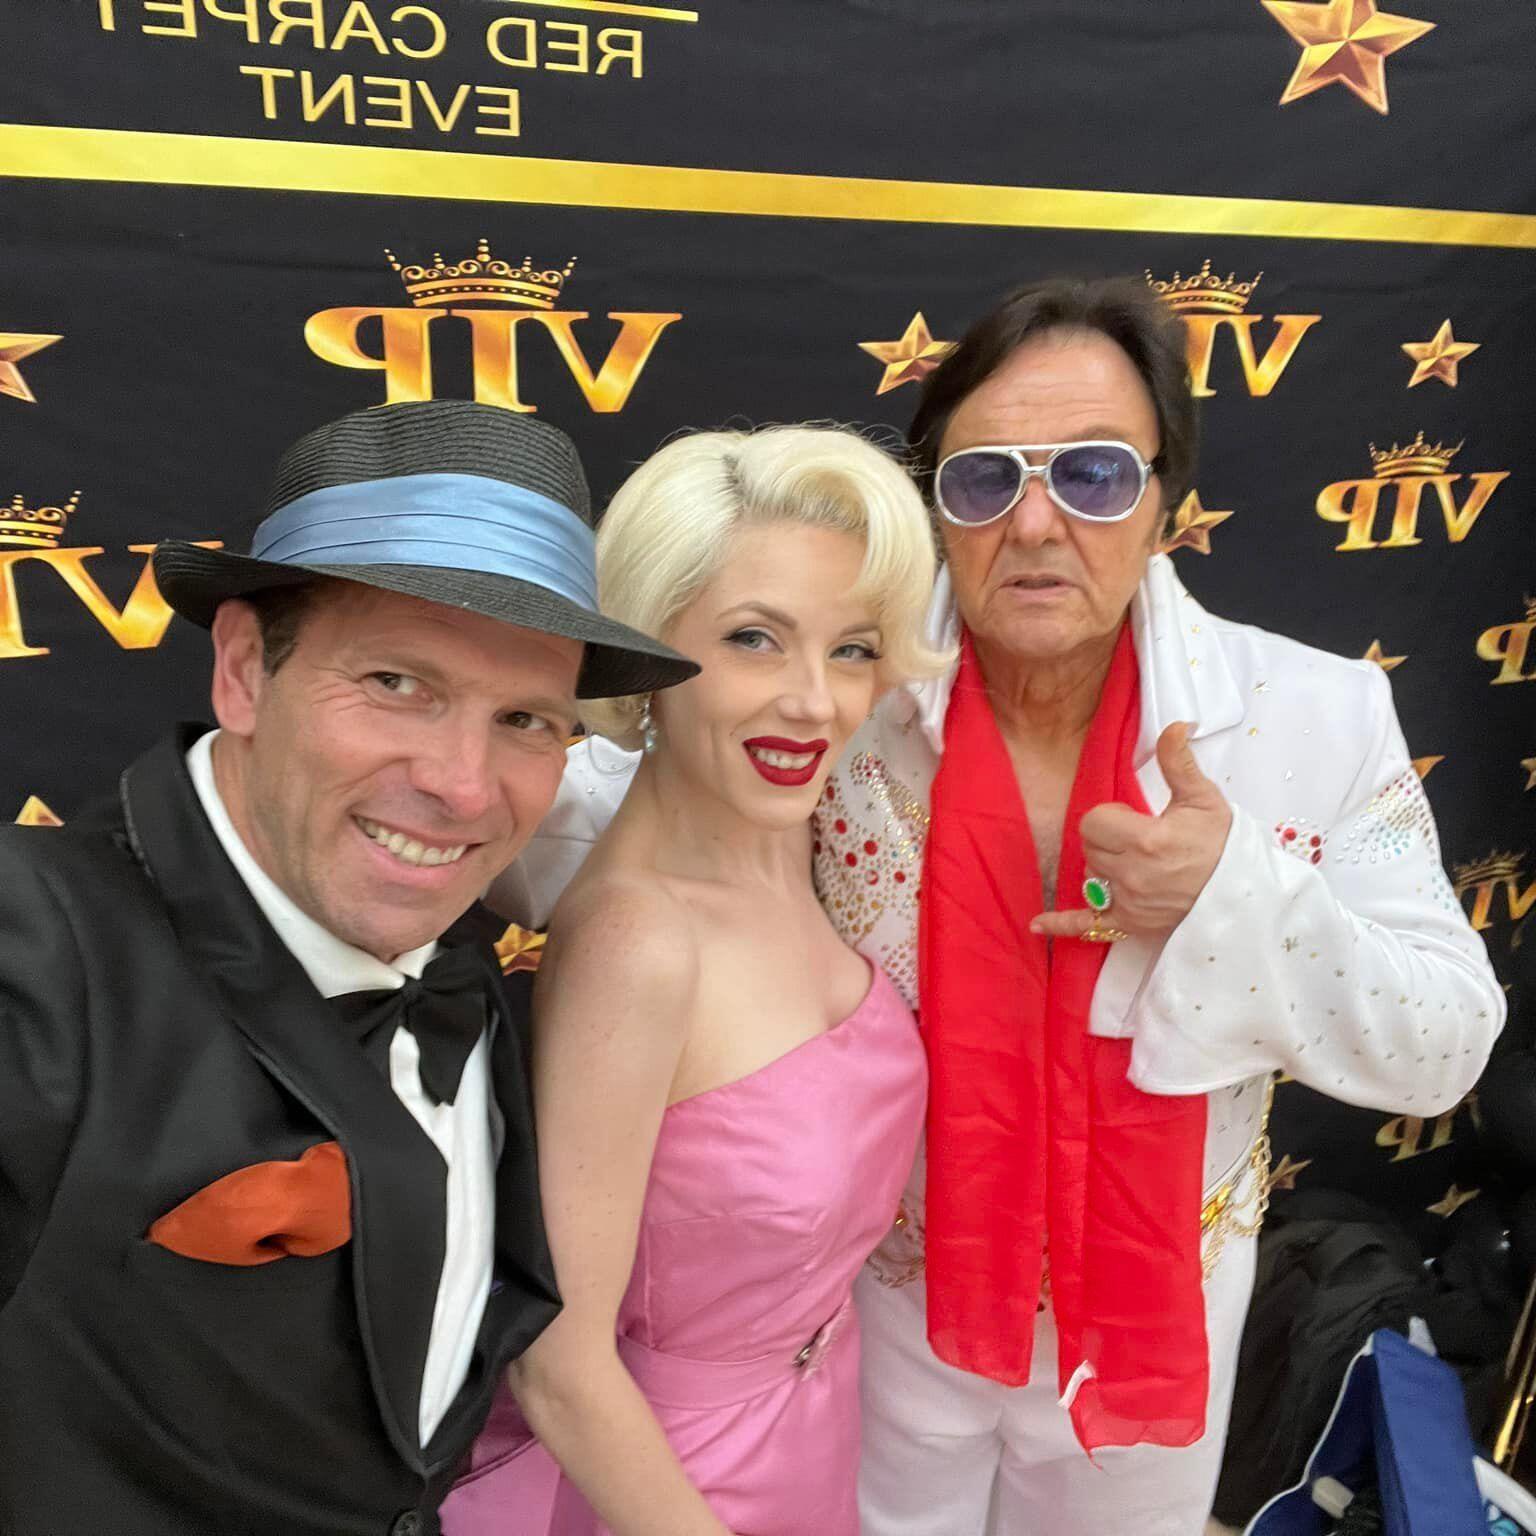 Paul Floriano doing an Elvis impersonation, with actors doing Marilyn Monroe and Frank Sinatra impersonations